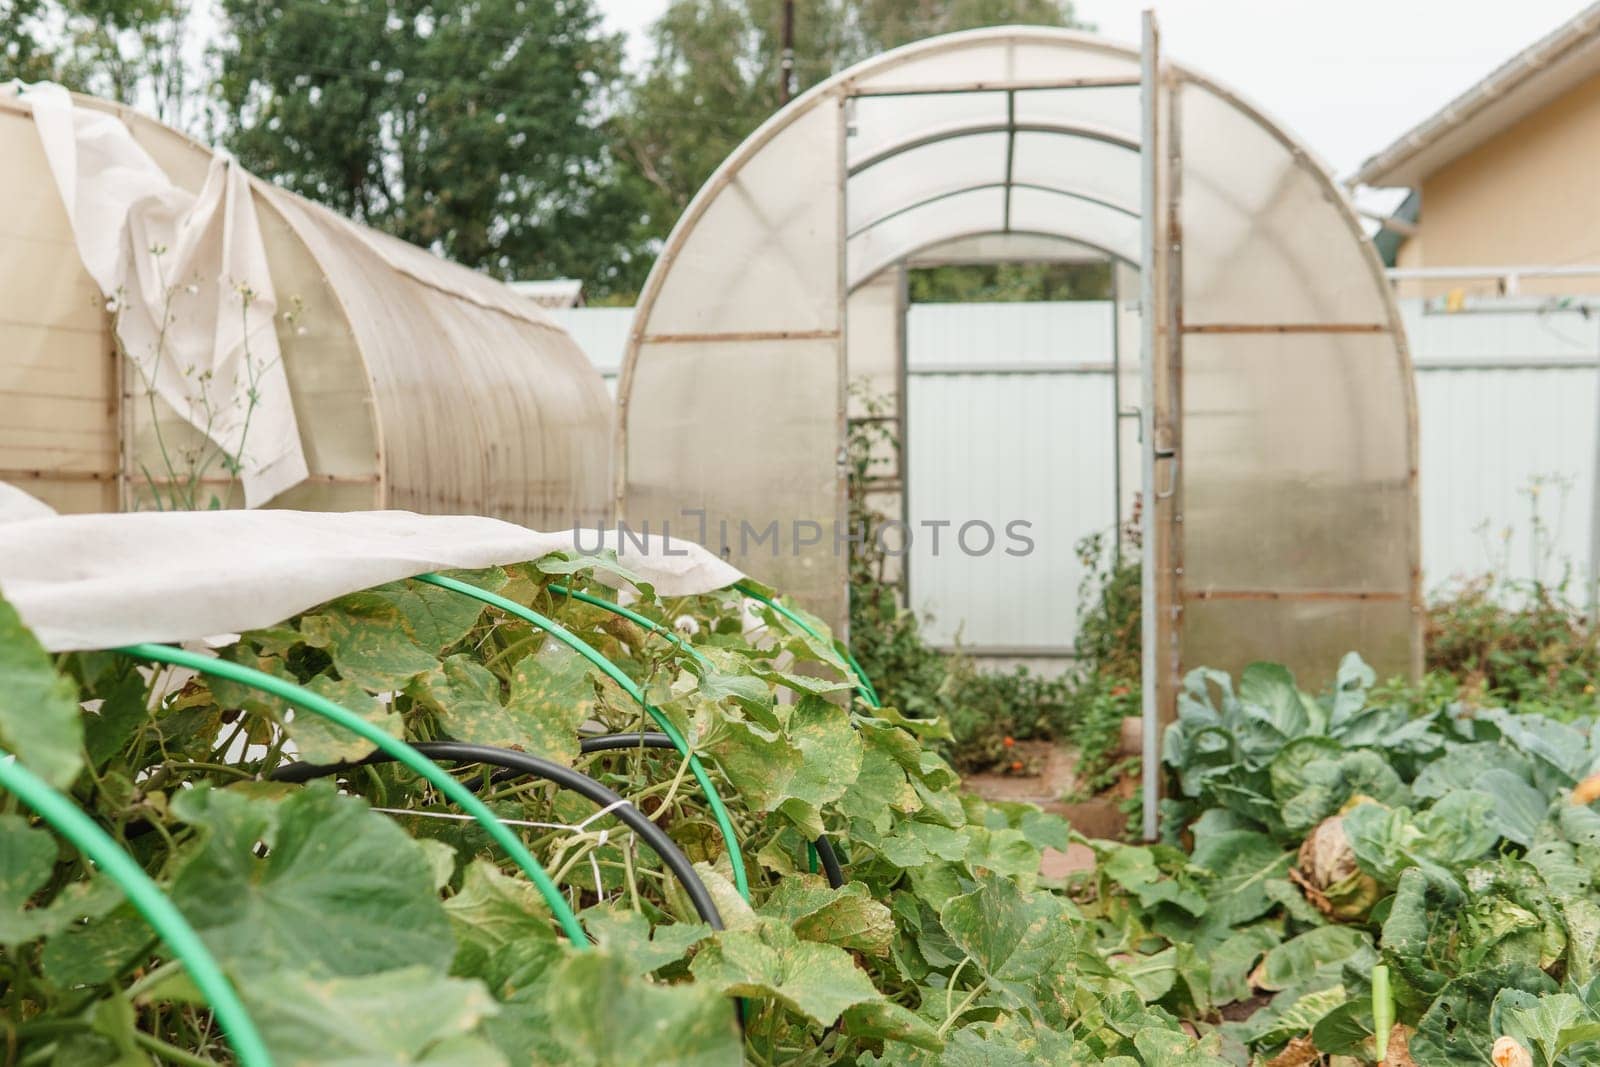 Large greenhouses for growing homemade vegetables. The concept of gardening and life in the country